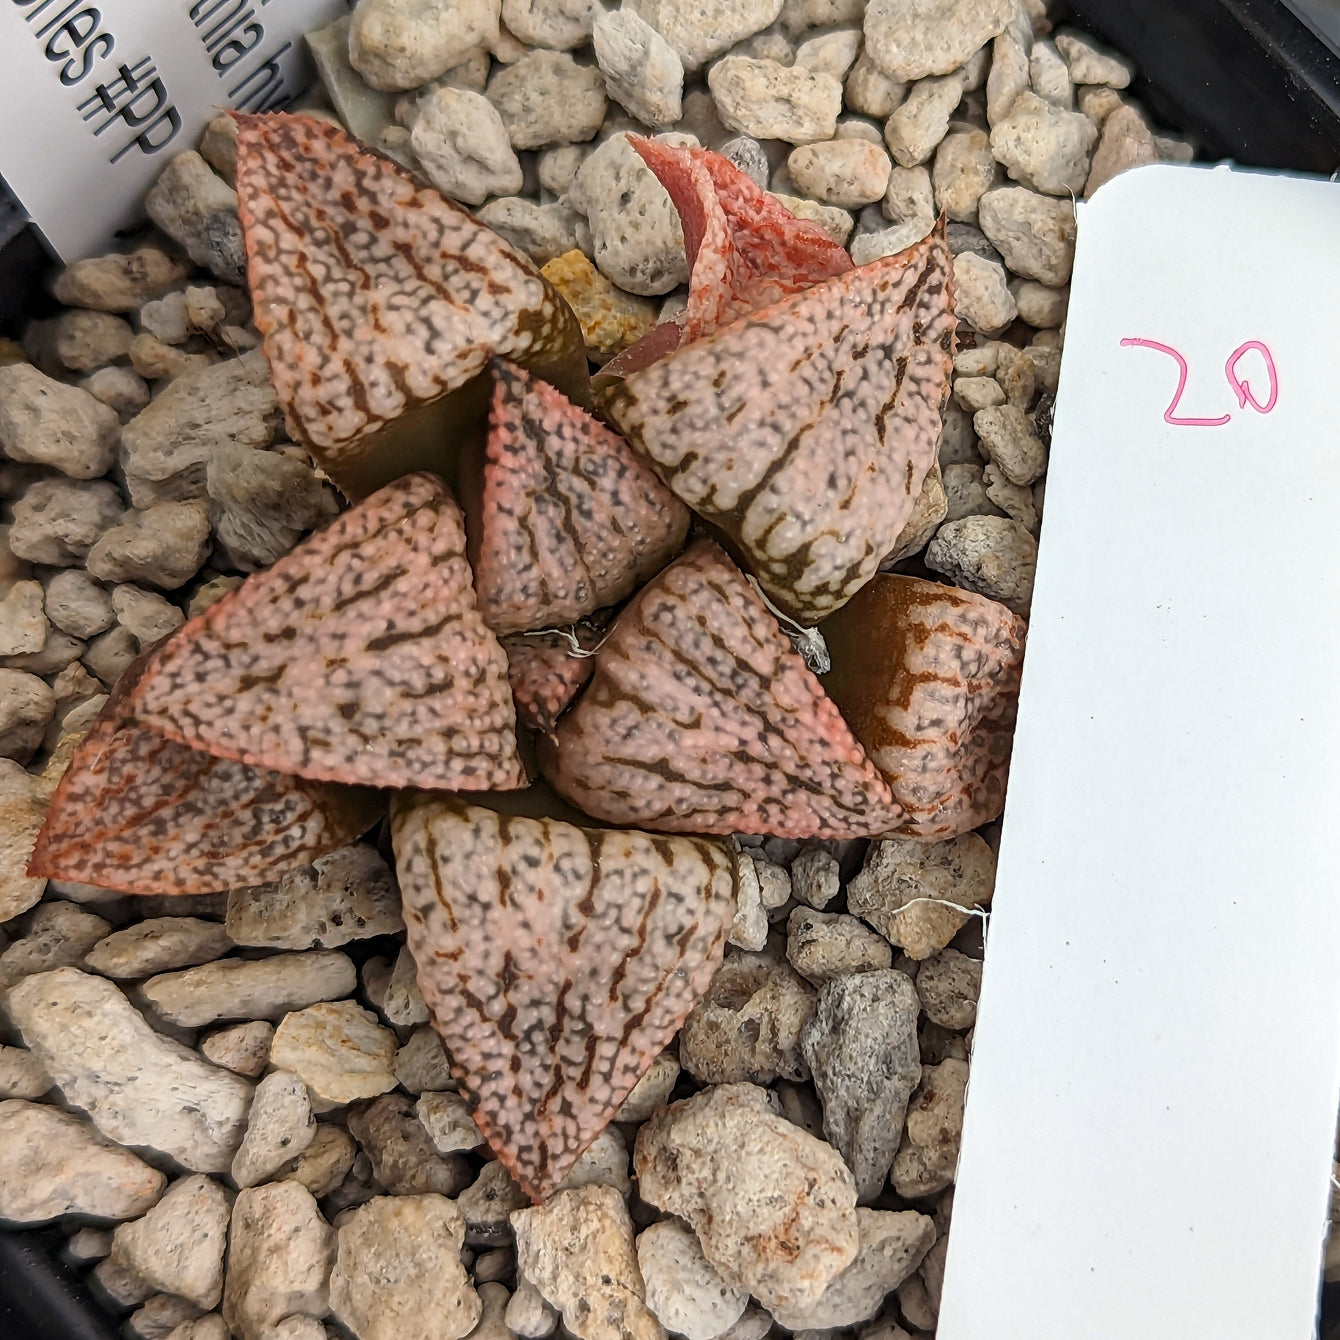 Haworthia "PP332" picta x Empress hybrid series #20 SOLD OUT